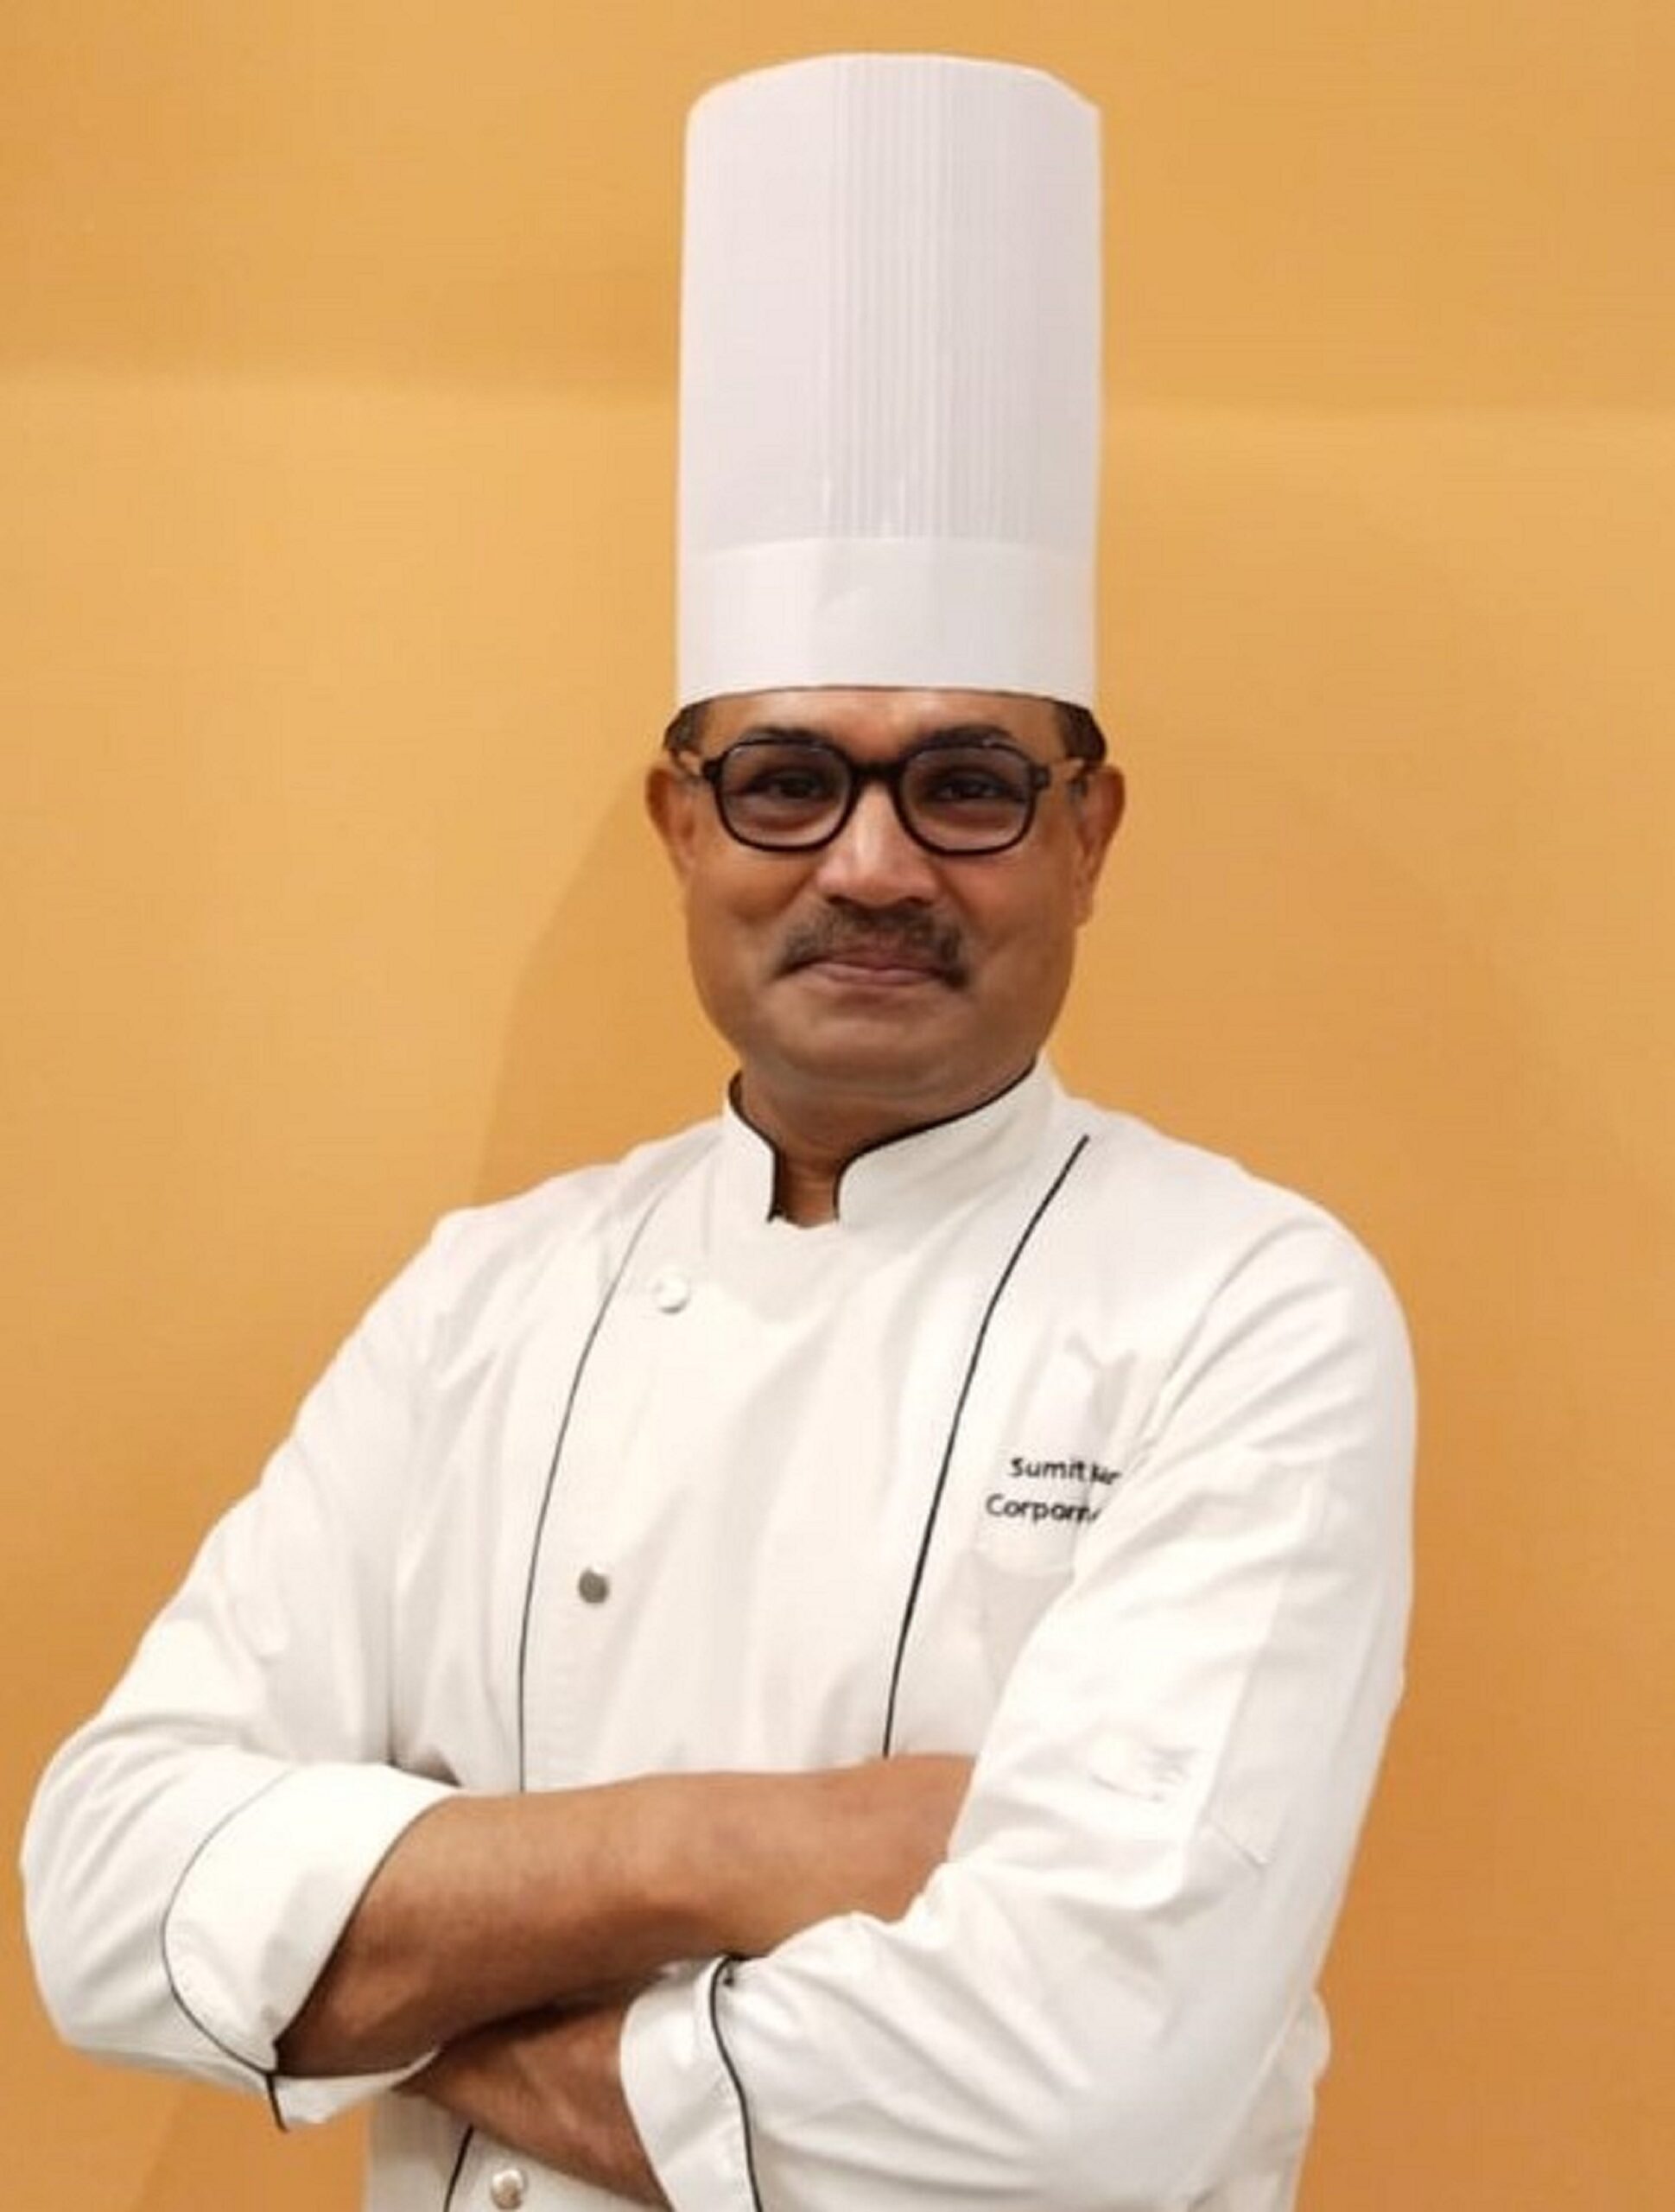 Leisure Hotels Group appoints Sumit Kumar as Corporate Chef